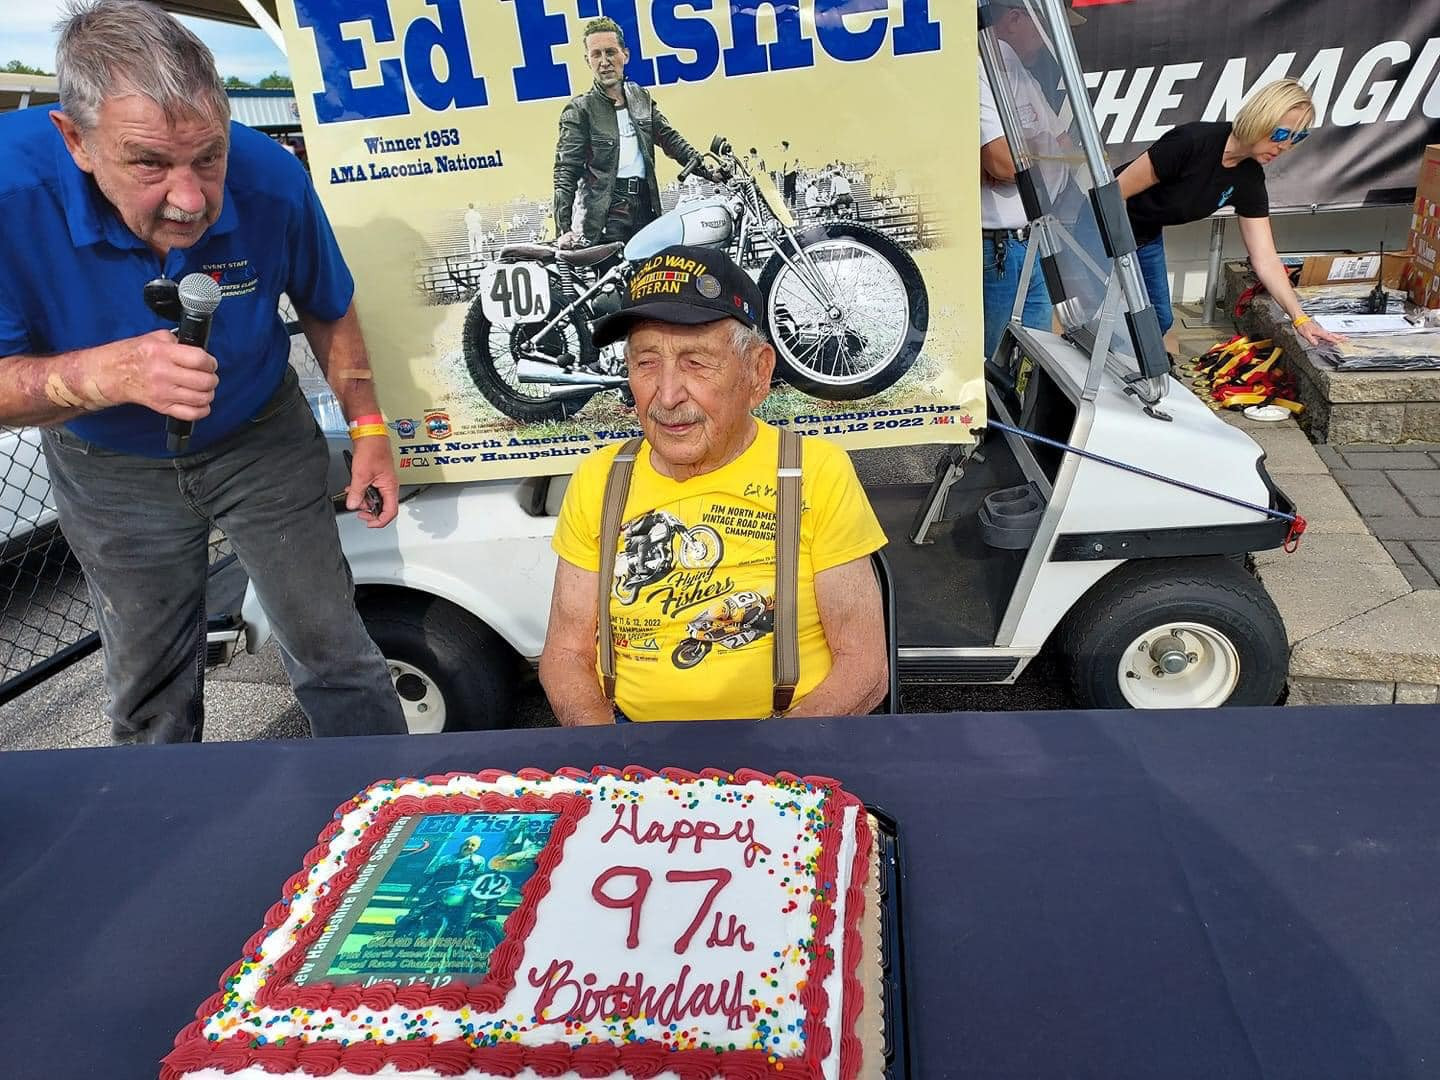 Ed Fisher (R.I.P.) celebrated his 97th birthday as Co-Grand Marshal of the USCRA/FIM North America Vintage Road Racing Championship event June 11, 2022 at New Hampshire Motor Speedway. Former racer and event announcer Richard Chambers looks to interview Fisher. Photo courtesy Kimberly Rivers.